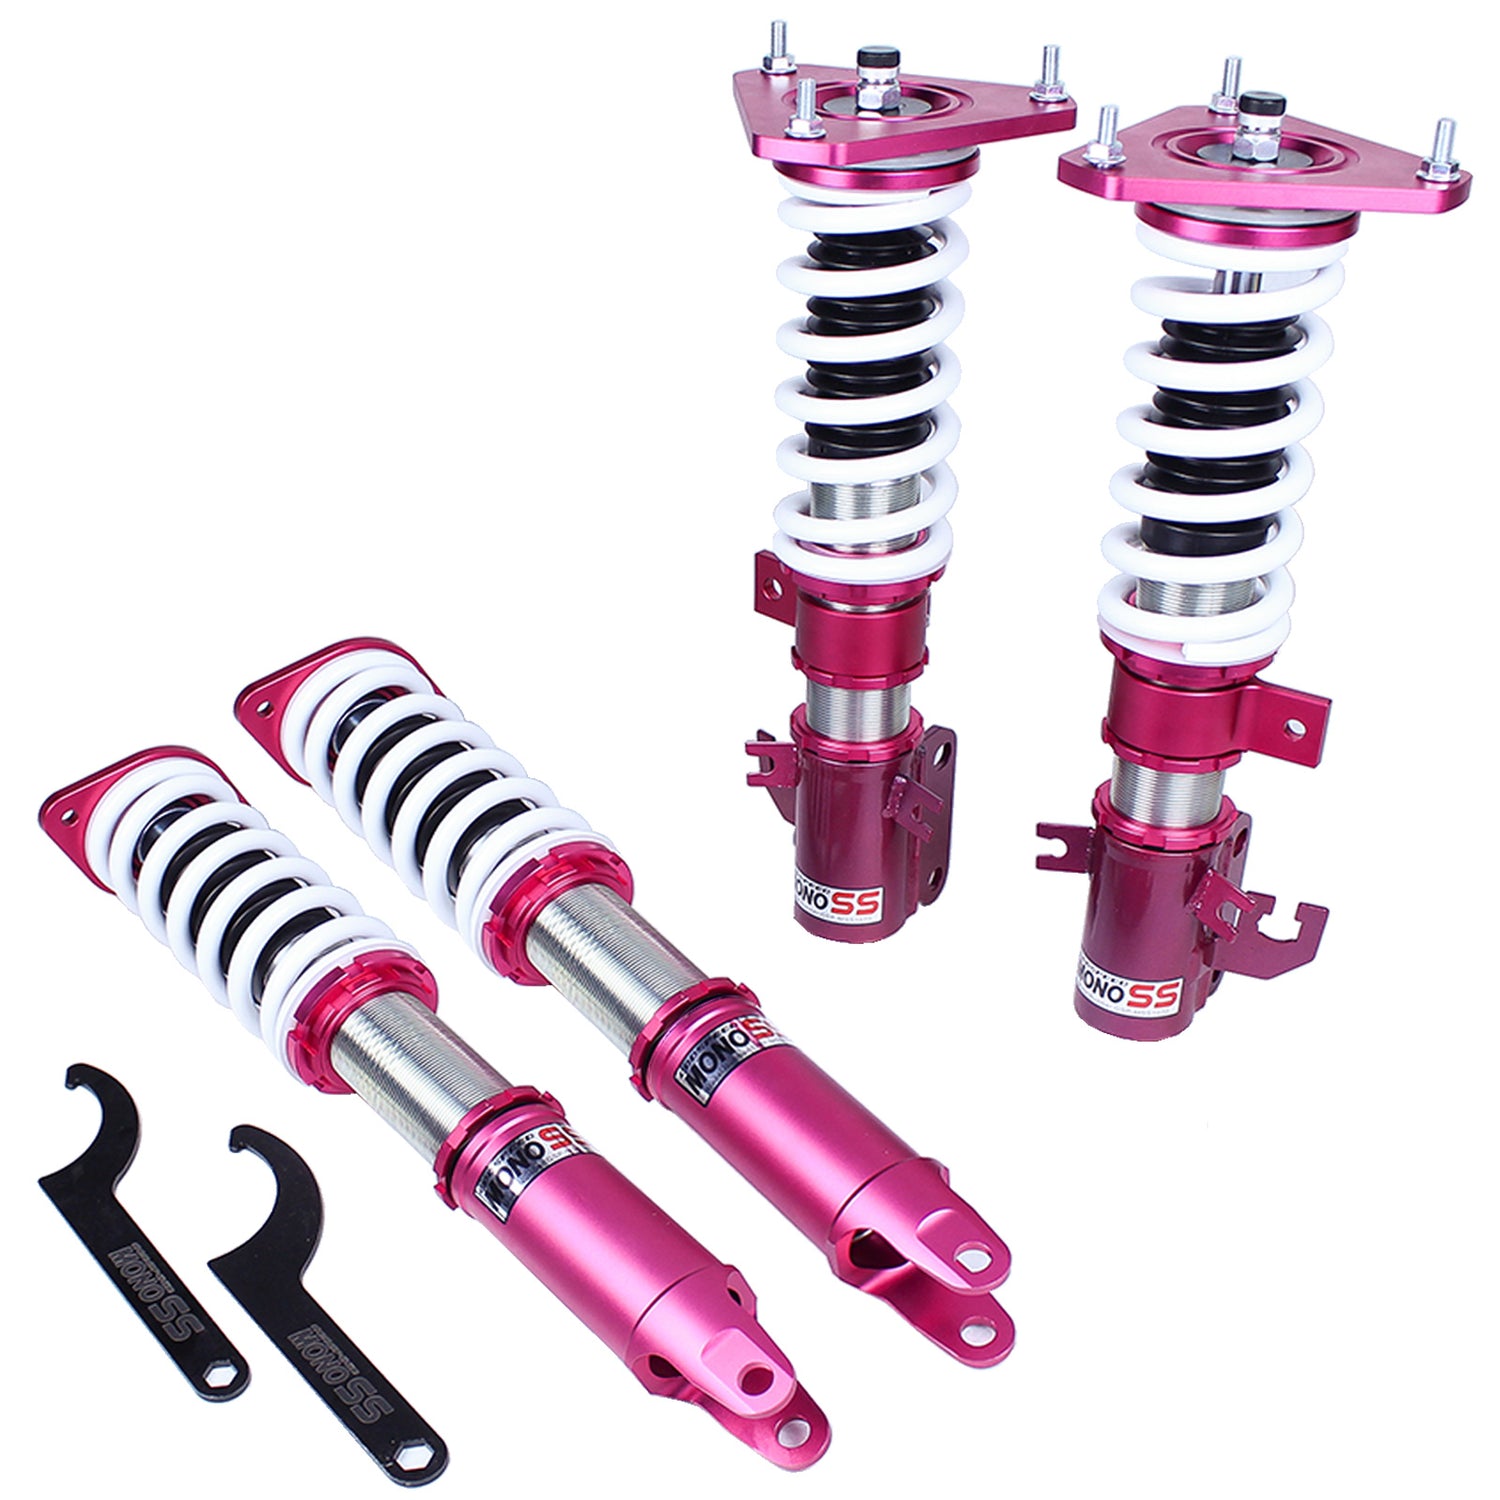 Godspeed MSS1070-B MonoSS Coilover Lowering Kit, Fully Adjustable, Ride Height, Spring Tension And 16 Click Damping, Nissan Maxima(A35) 2009-14